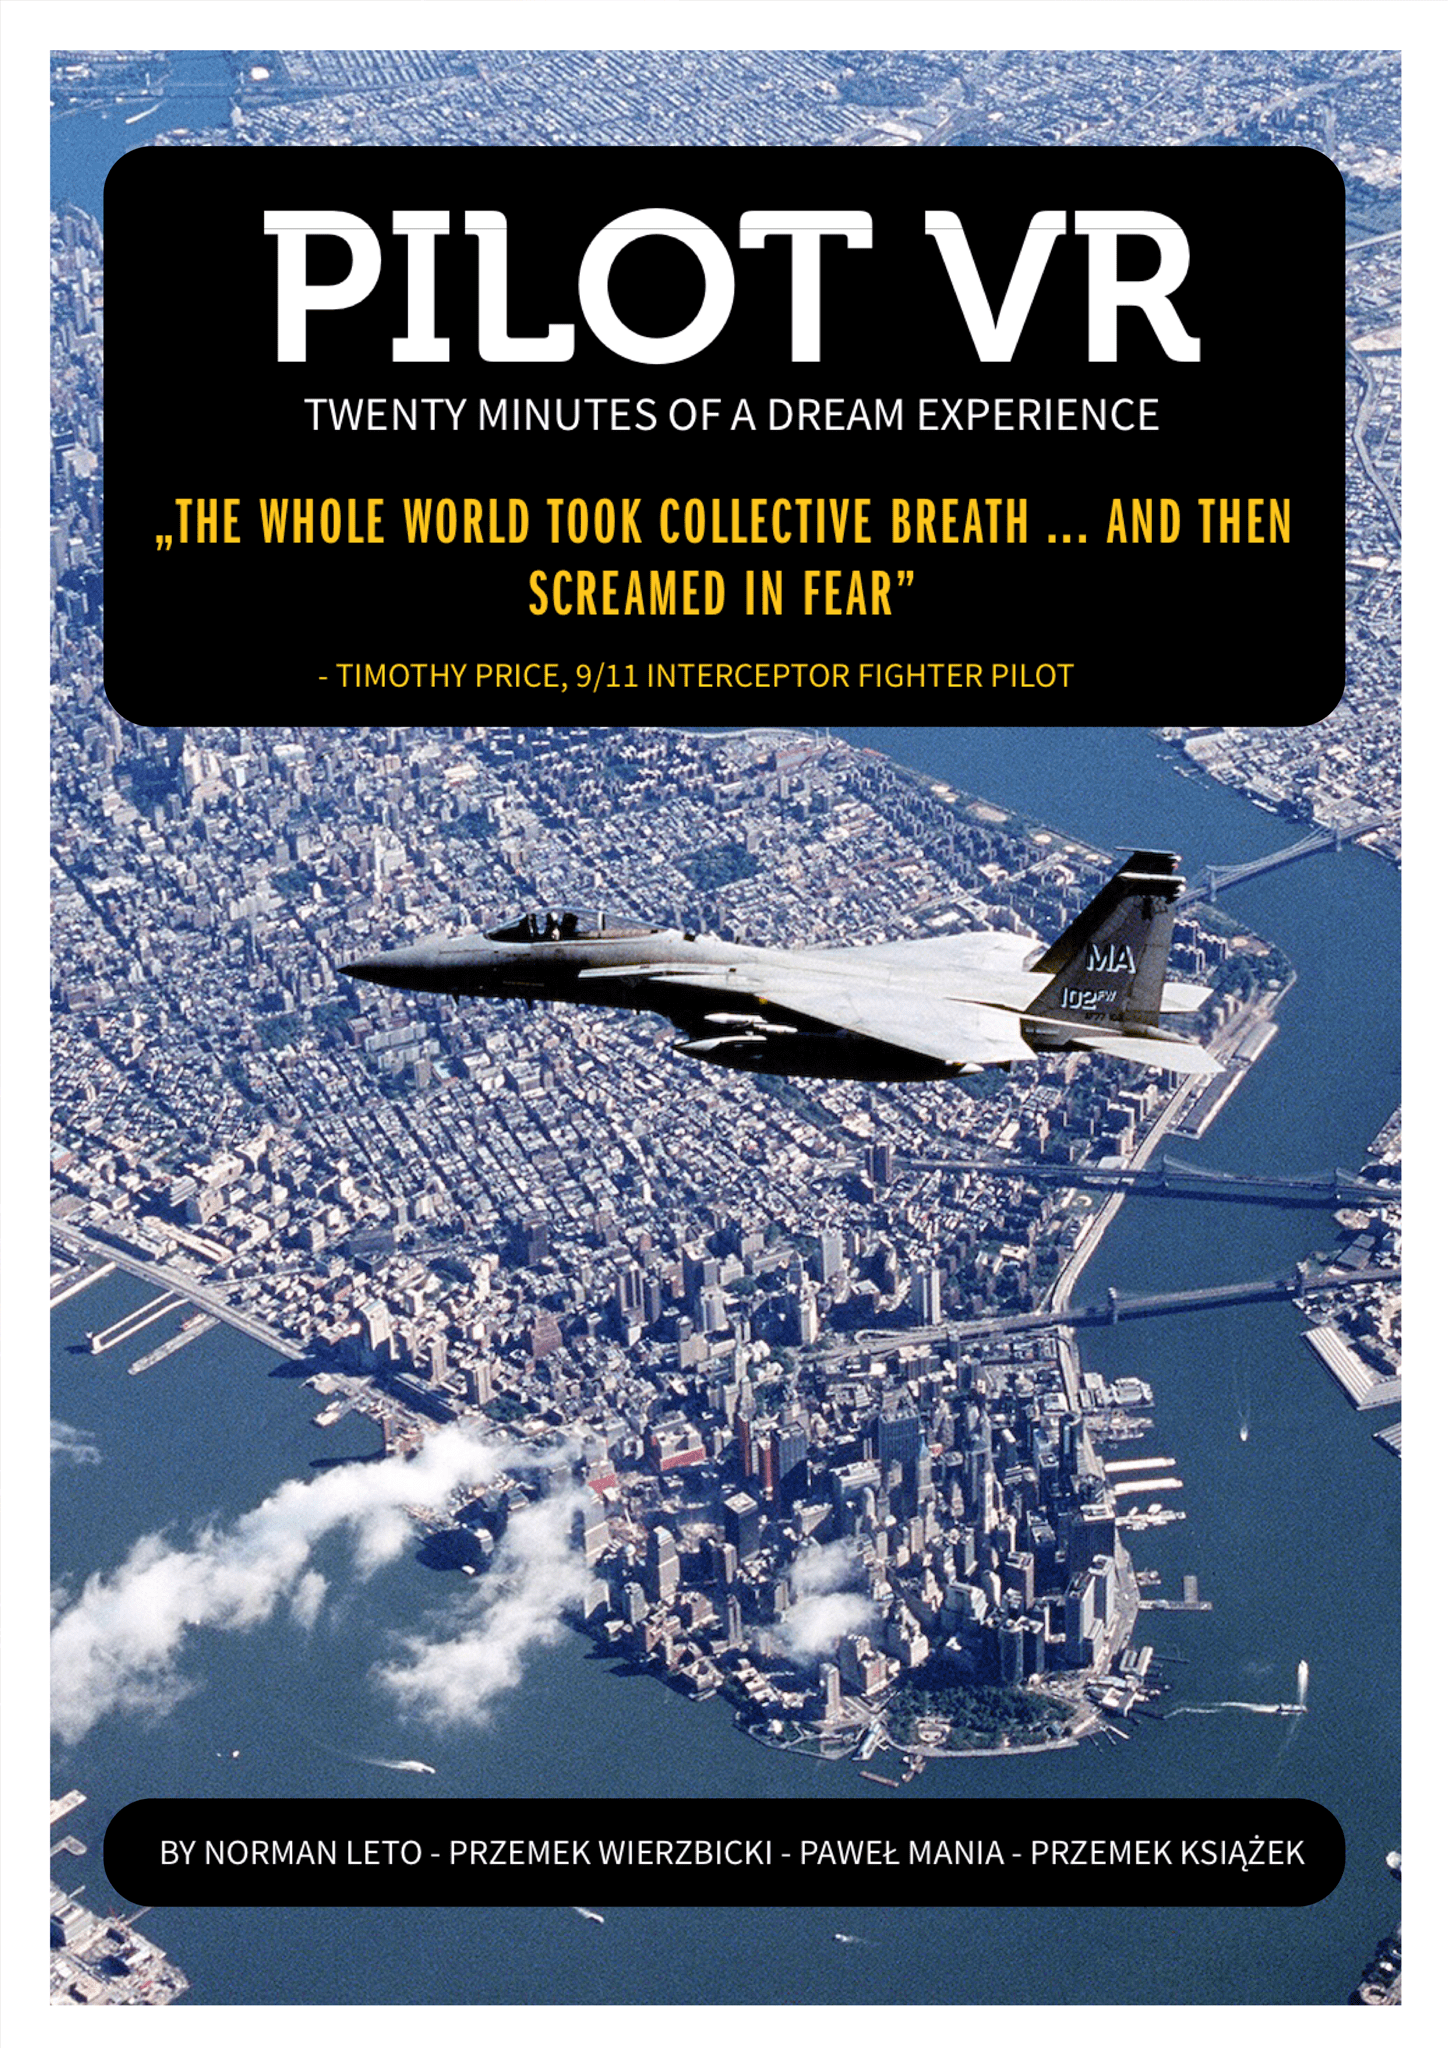 Pilot 9/11 presents the events of 11 September 2001 from the unique perspective of military aviators who followed the hijacked passenger planes to prevent the tragedy. The assessment from their point of view sheds new light on absolutely familiar images. The cramped cockpit of the plane contrasting with the boundless expanse of New York is a perfect environment for VR recreation. Although we are almost in the centre of events, we remain locked in the cockpit, like powerless observers.
</p><p>
How do you remain fully focused and decisive while seeing desperate pleas for rescue, and watching - without being able to help - the horror of scenes taking place just a few hundred meters away? Yet what happened at the World Trade Centre is not, despite appearances, the main focus. Pilot 9/11 is a twenty-minute story about coming out of trauma - wider, national trauma and the subjective, personal kind.</p>
